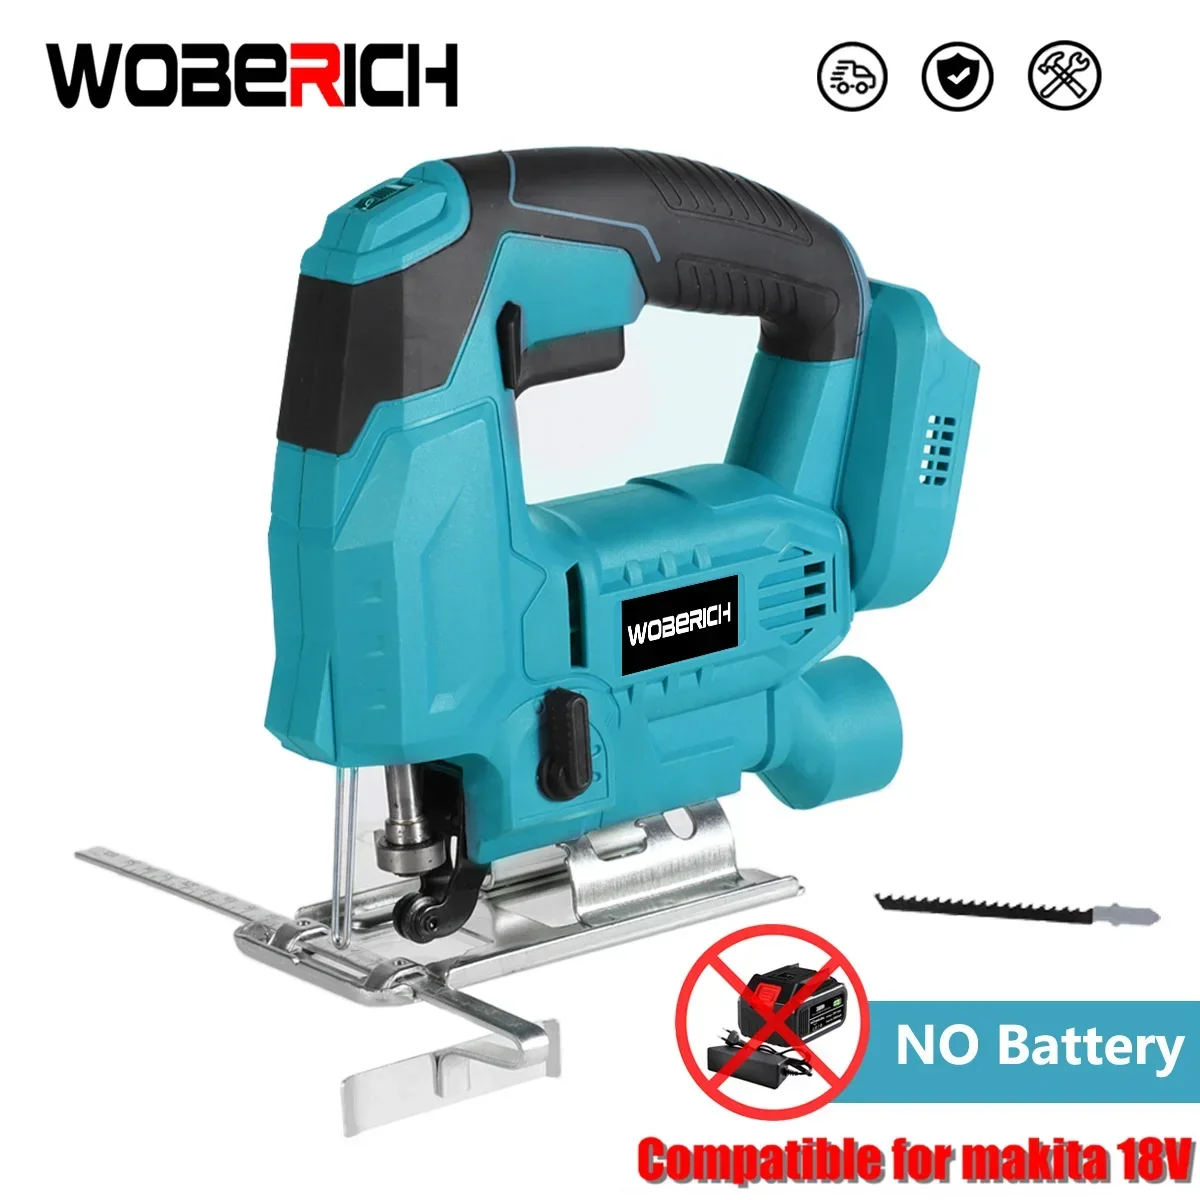 65mm 18V Cordless Jigsaw Electric Jig Saw Blade Adjustable Woodworking LED 6 Gear Speed Power Tool for Makita 18V Battery 65mm 2900rpm 18v brushless jigsaw electric jig saw blade adjustable woodworking led power tool for makita 18v battery